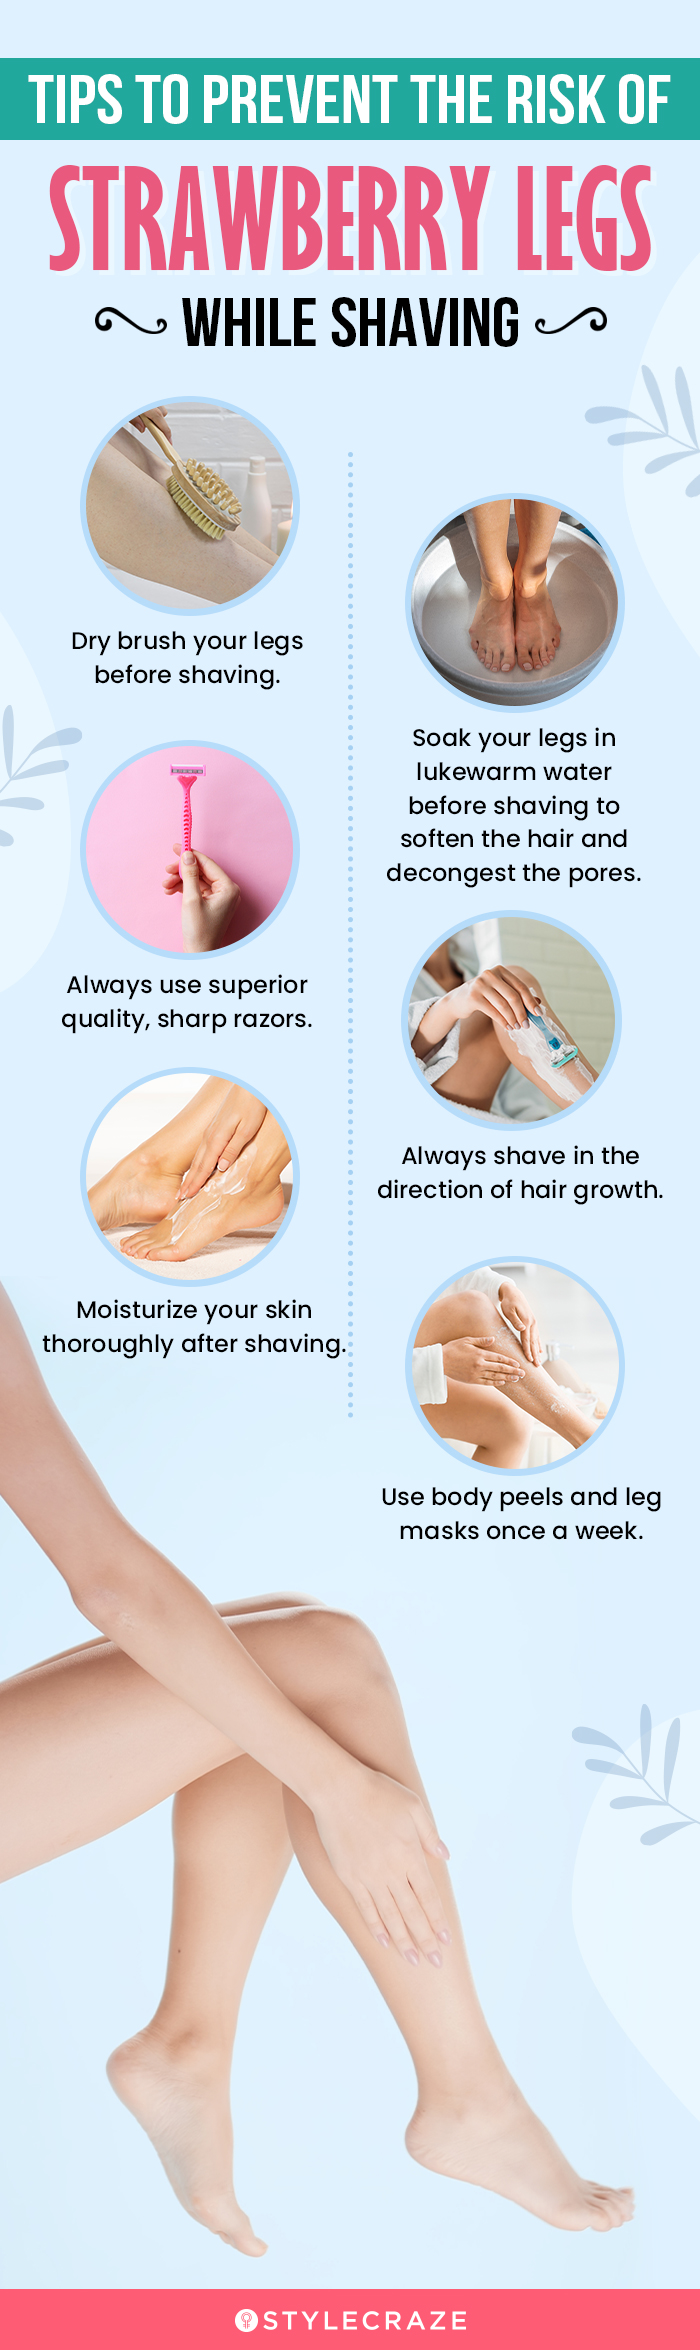 tips to prevent the risk of strawberry legs while shaving (infographic)